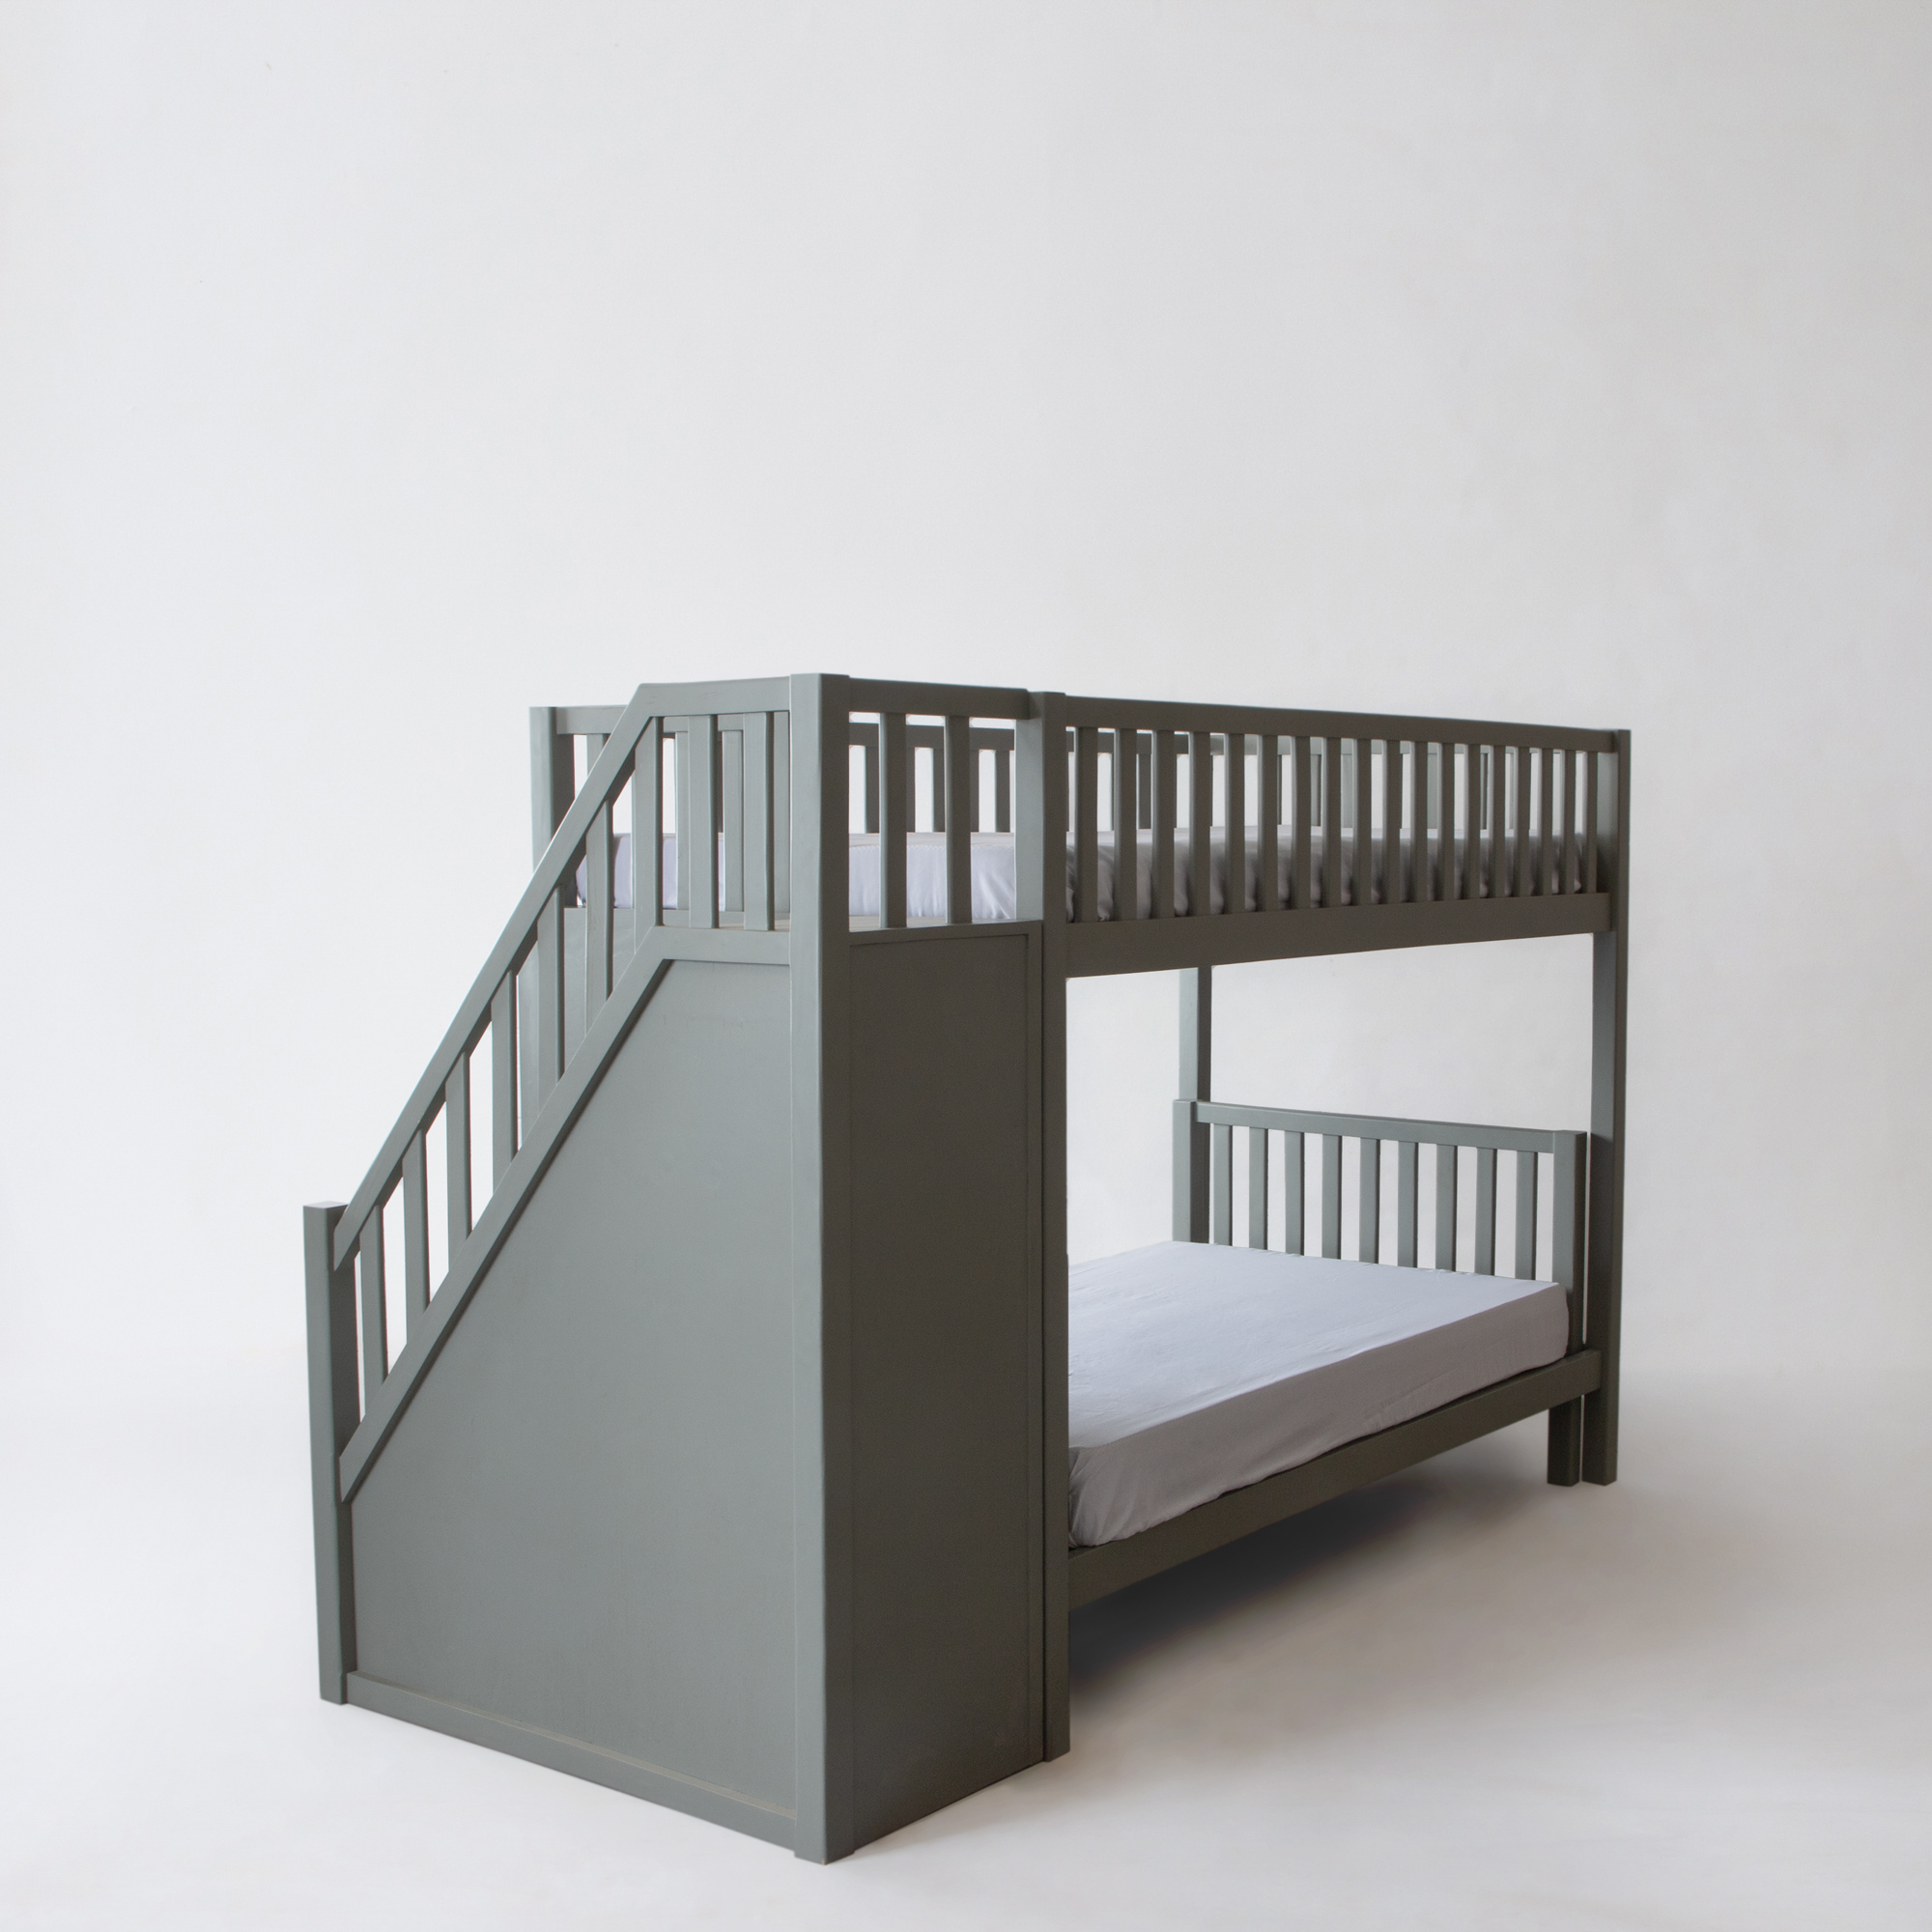 Island Bunk Bed with My Junior Dream Bed and Storage Staircase